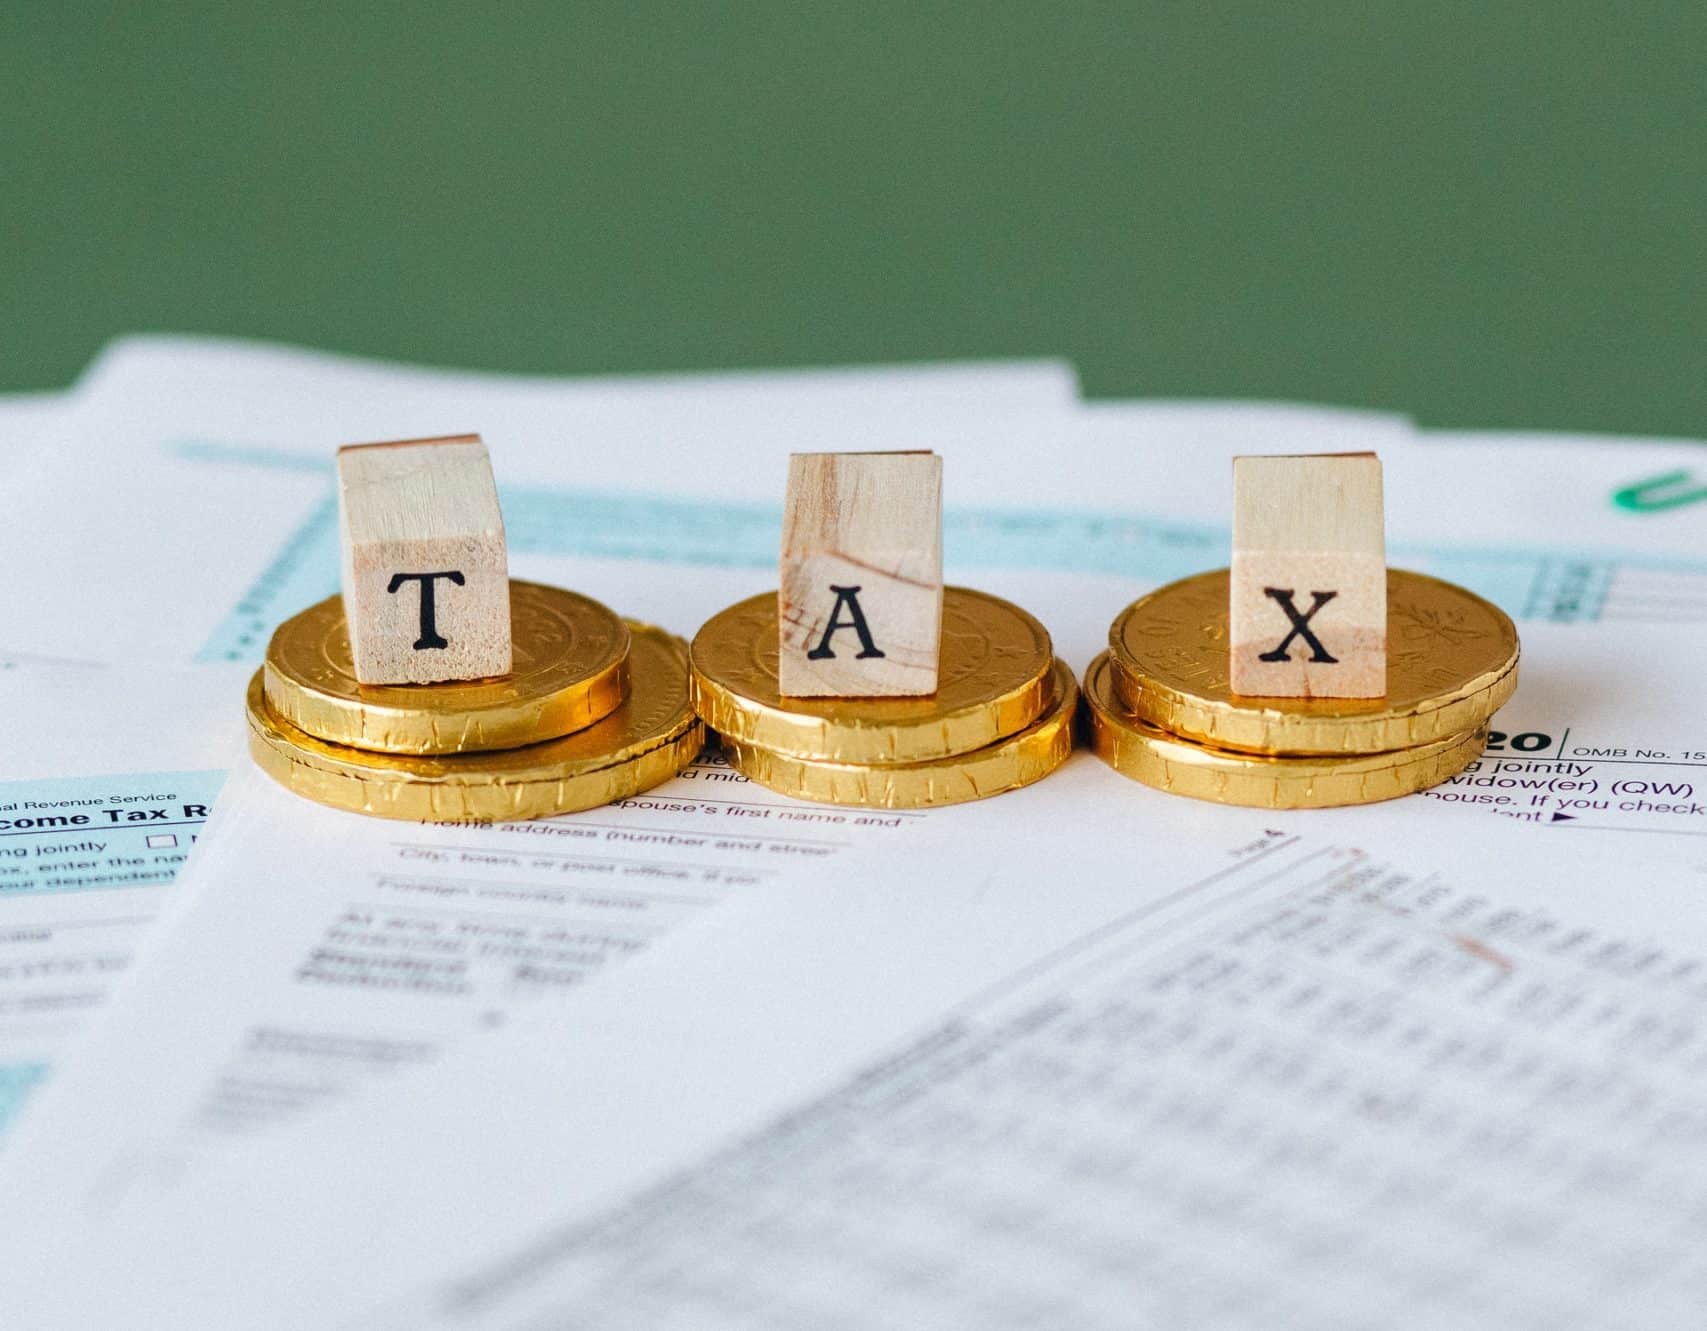 Ensure you’re tax and legally compliant – Part II